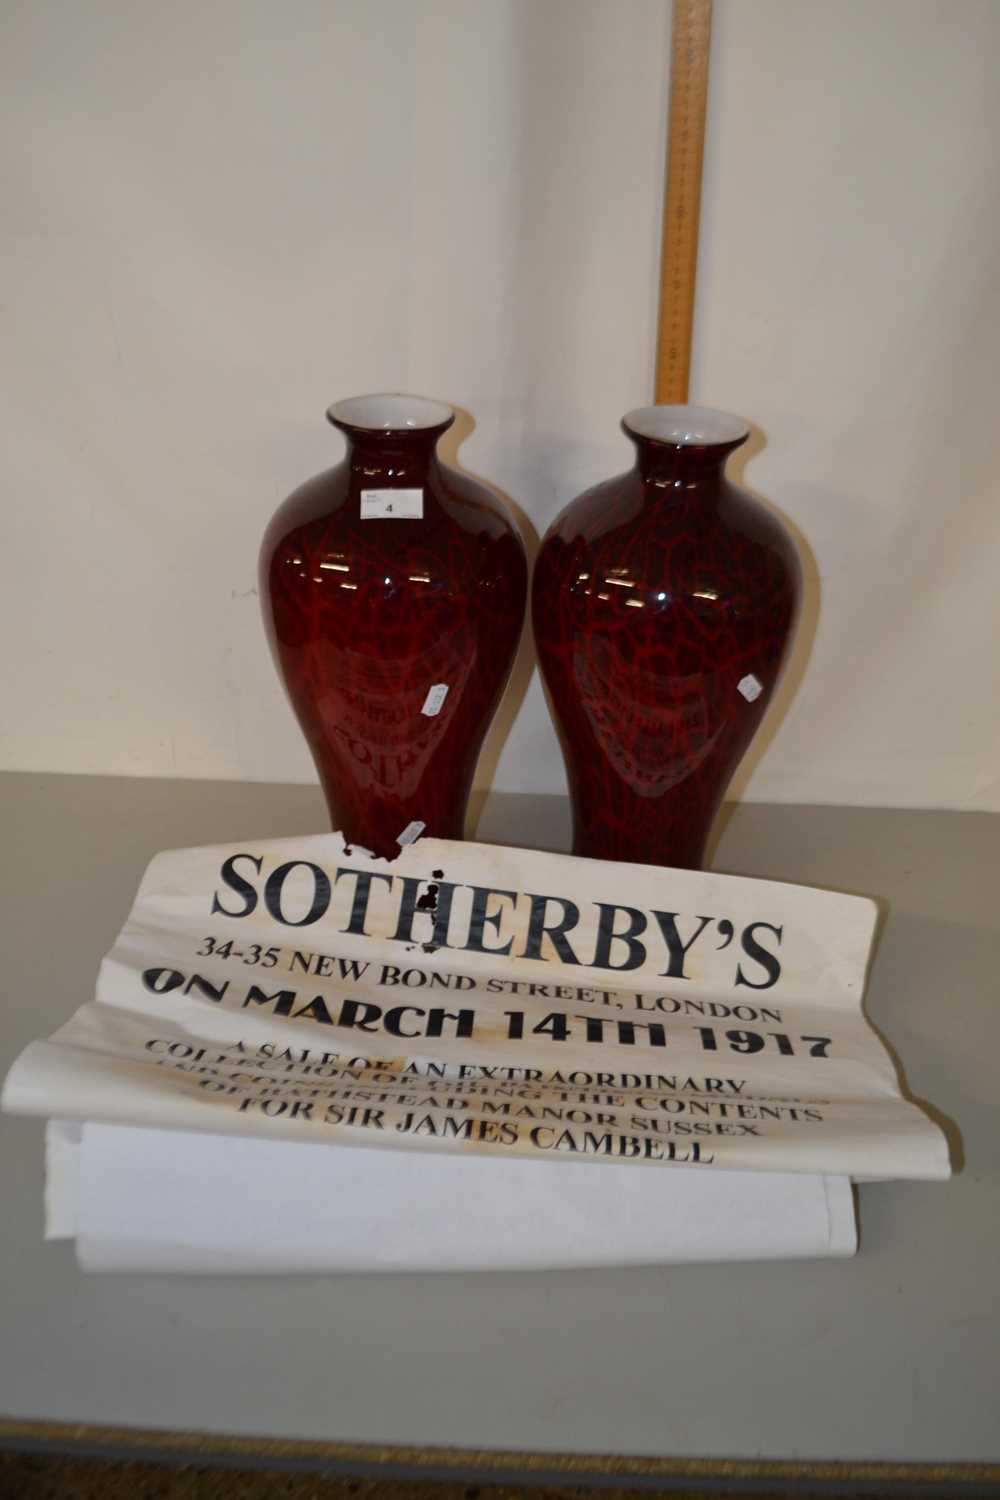 Pair of contemporary Art Glass vases together with three reproduction auction posters - Image 2 of 2